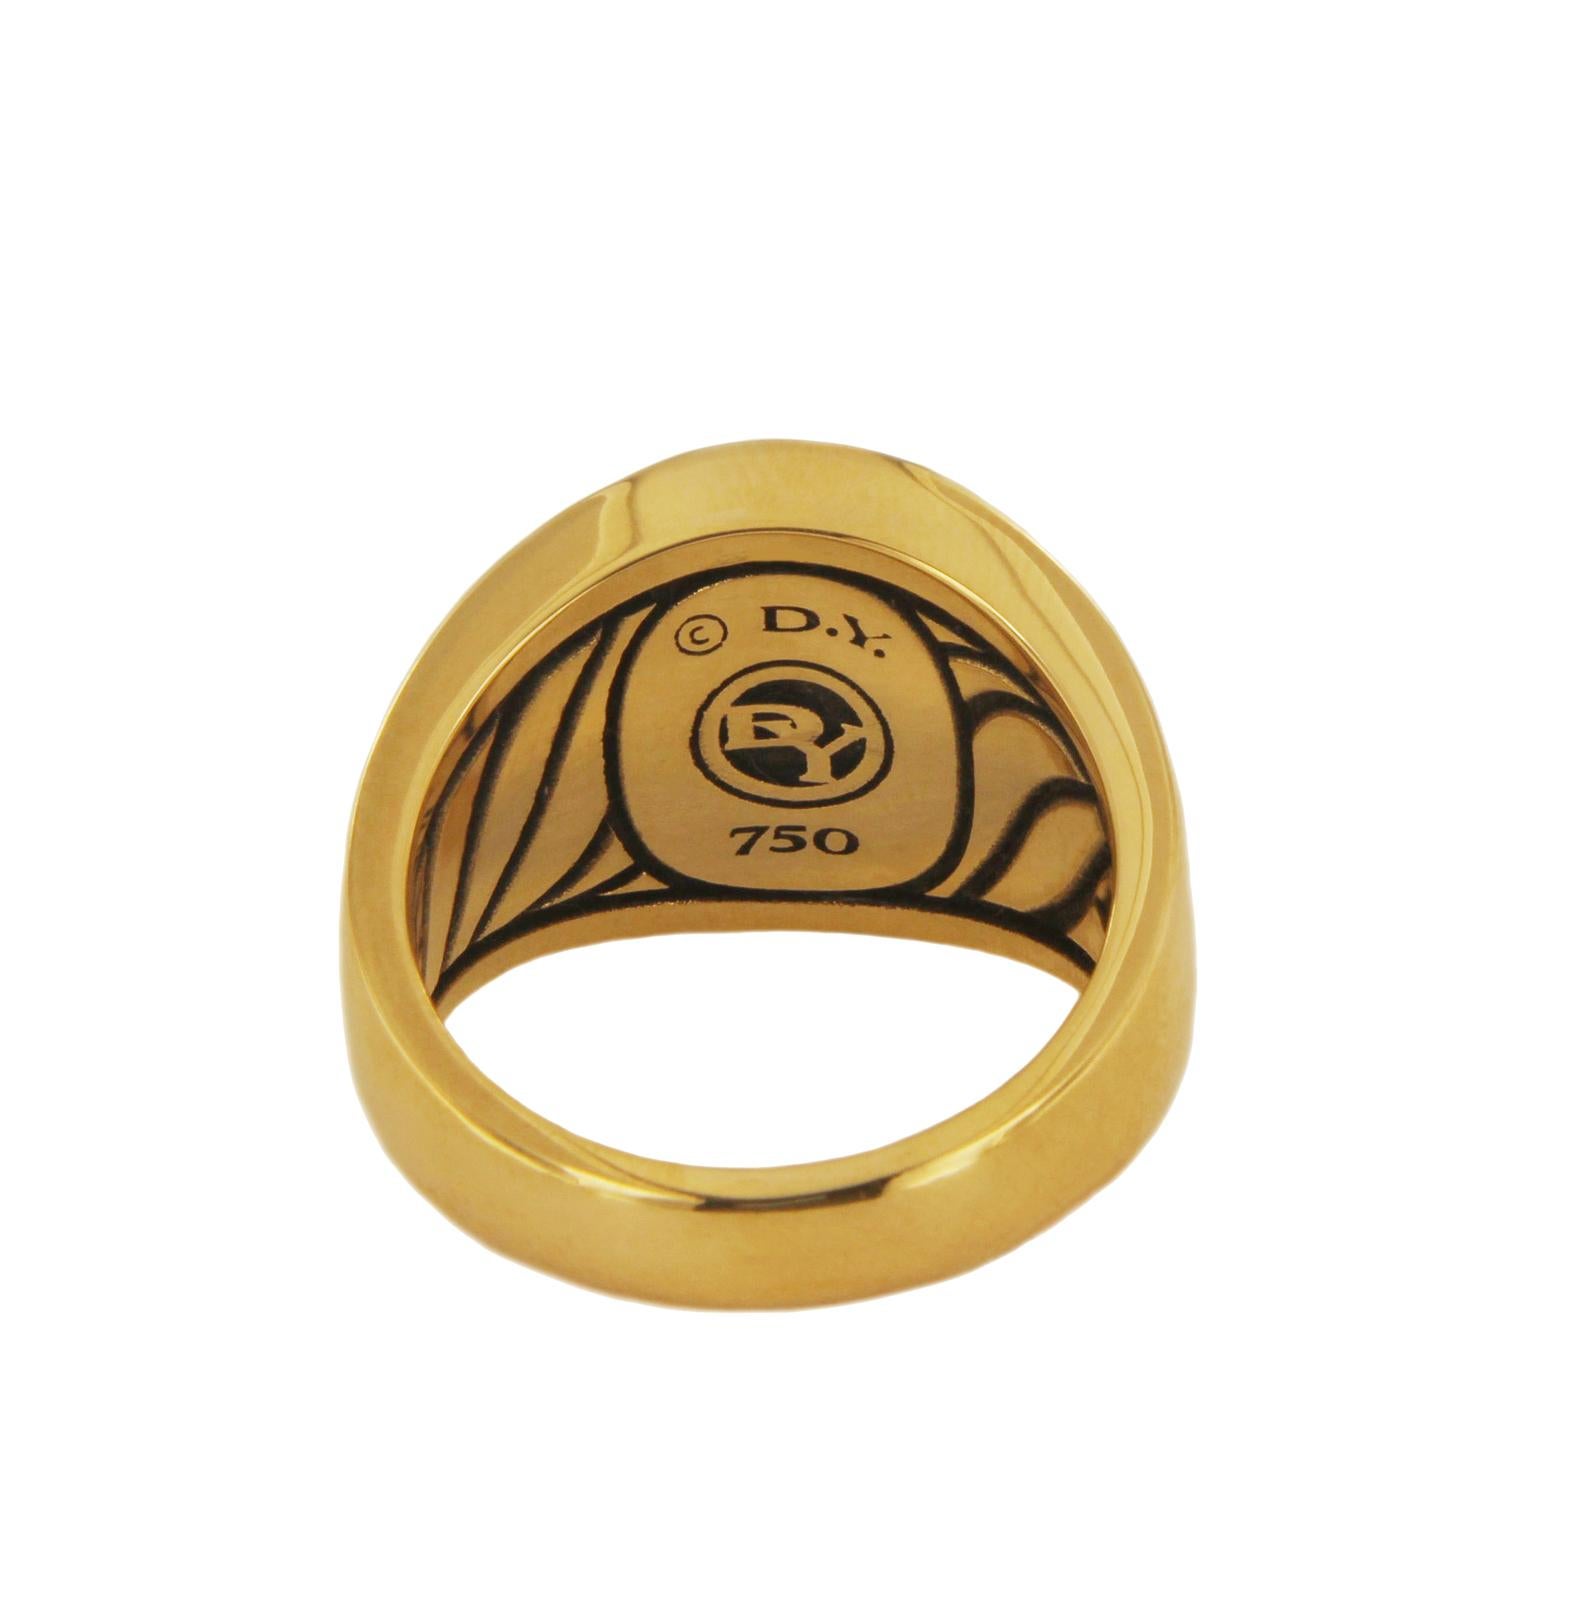 -Material: 18k Yellow Gold
-Ring size: 9
-Black Onyx: 11x14mm
-Ring weight: 18.3gr
-Ring width: 4.8-16mm

*Includes David Yurman Box.